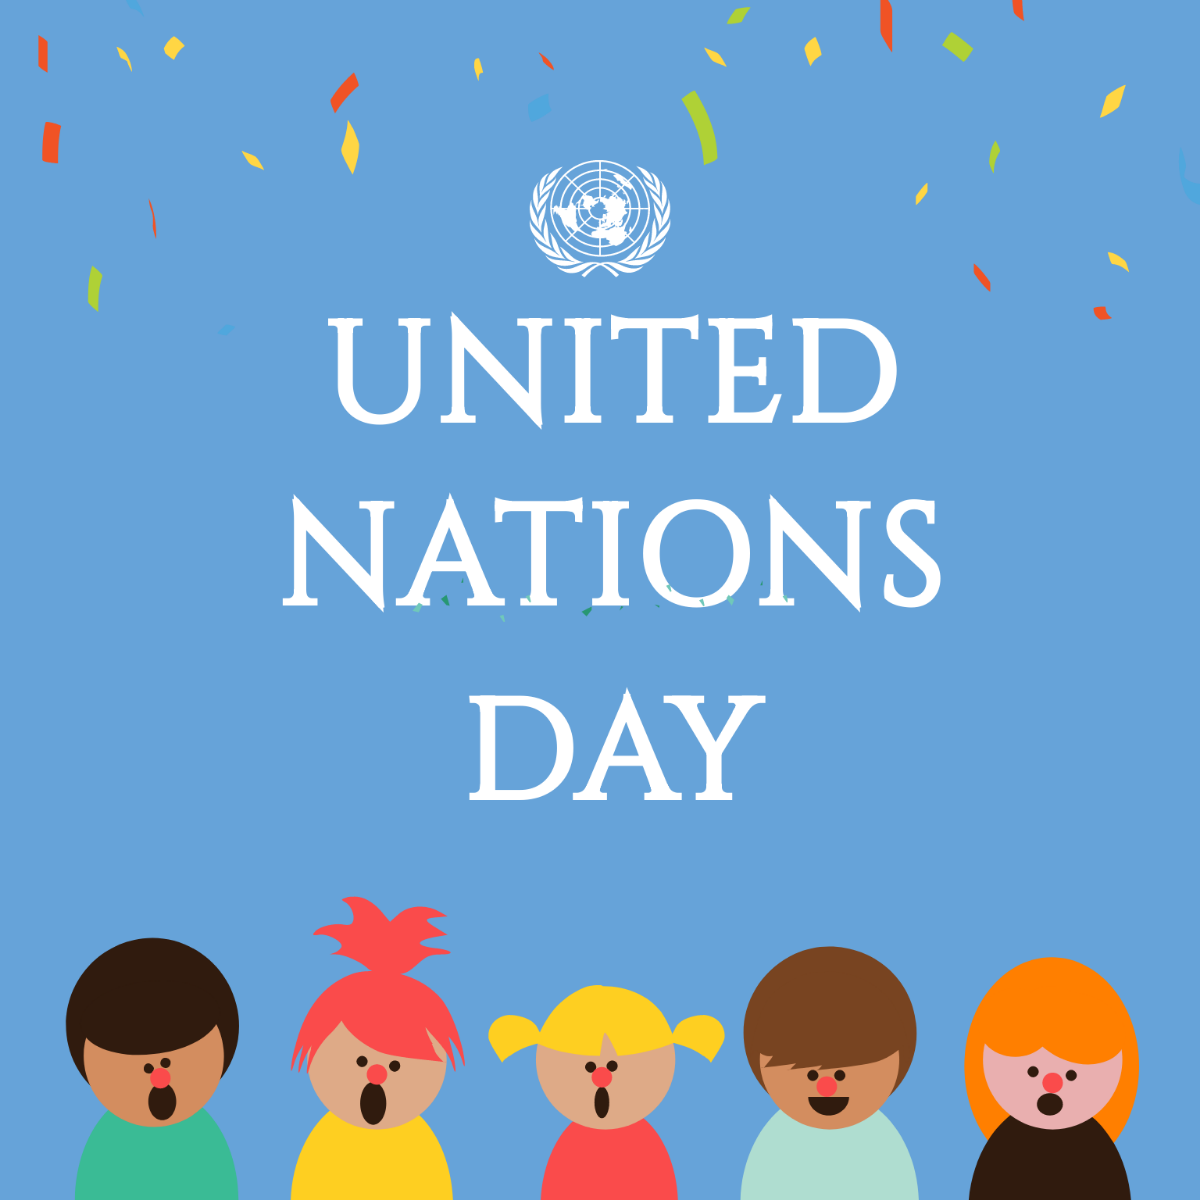 United Nations Day Cartoon Vector